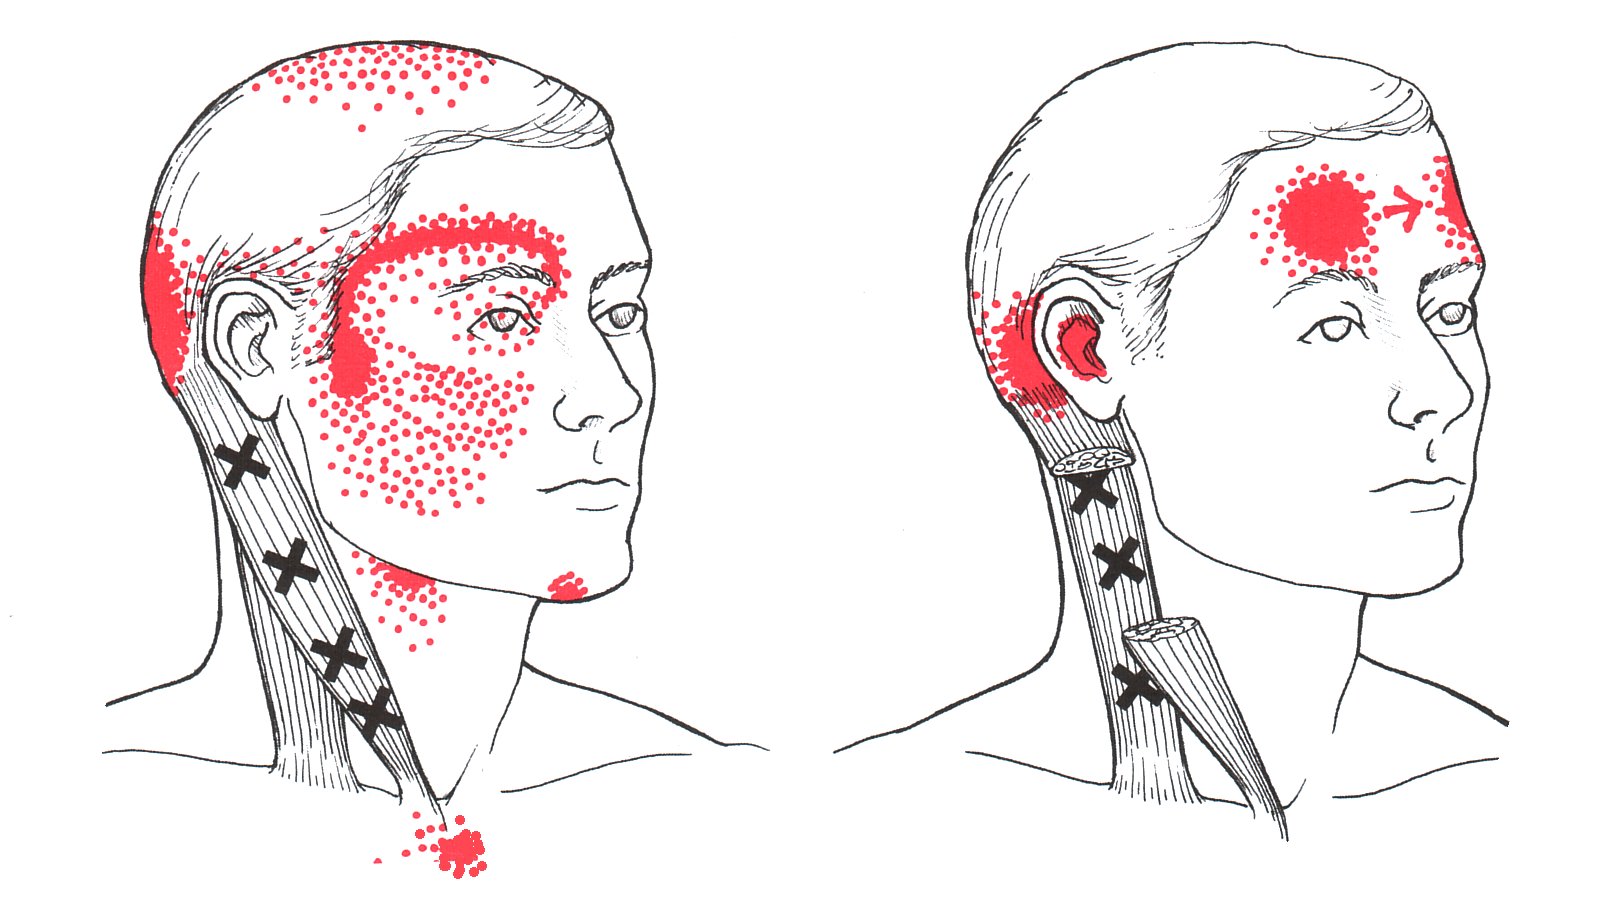 Sternocleidomastoid | The Trigger Point & Referred Pain Guide